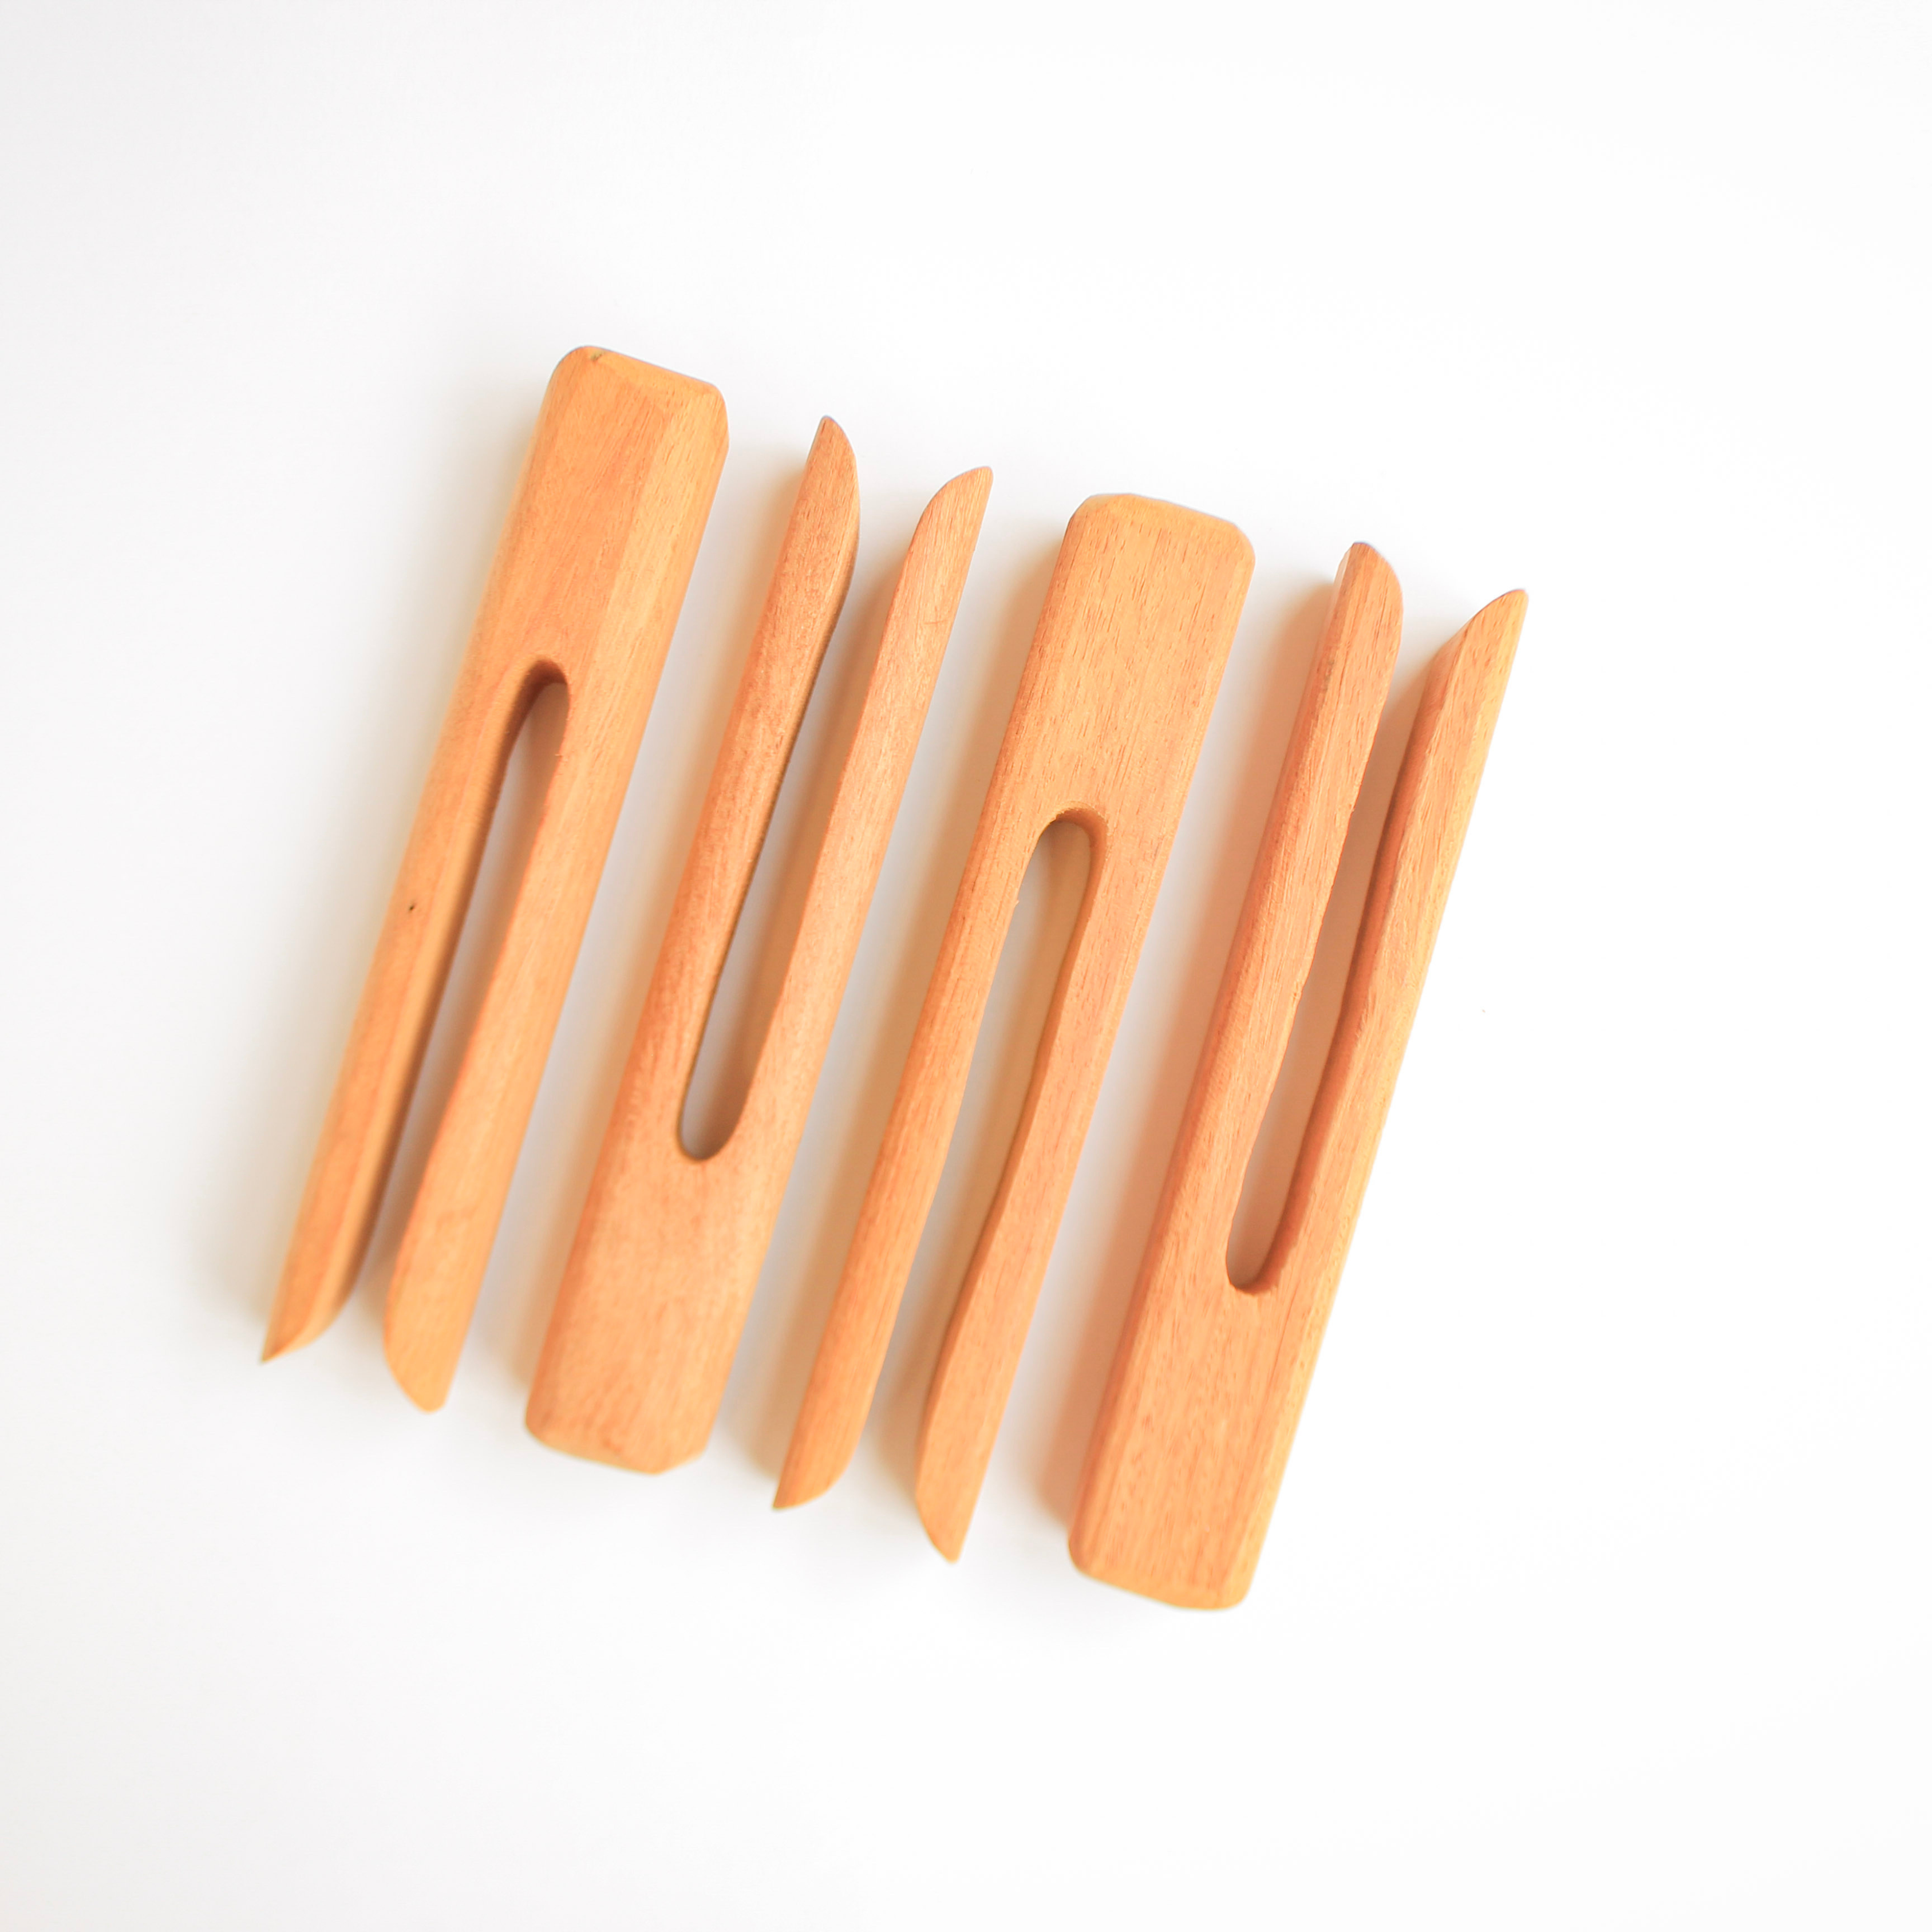 Hand-Carved Wooden Napkin Holders (Set of 4) - Clothespin by Mended